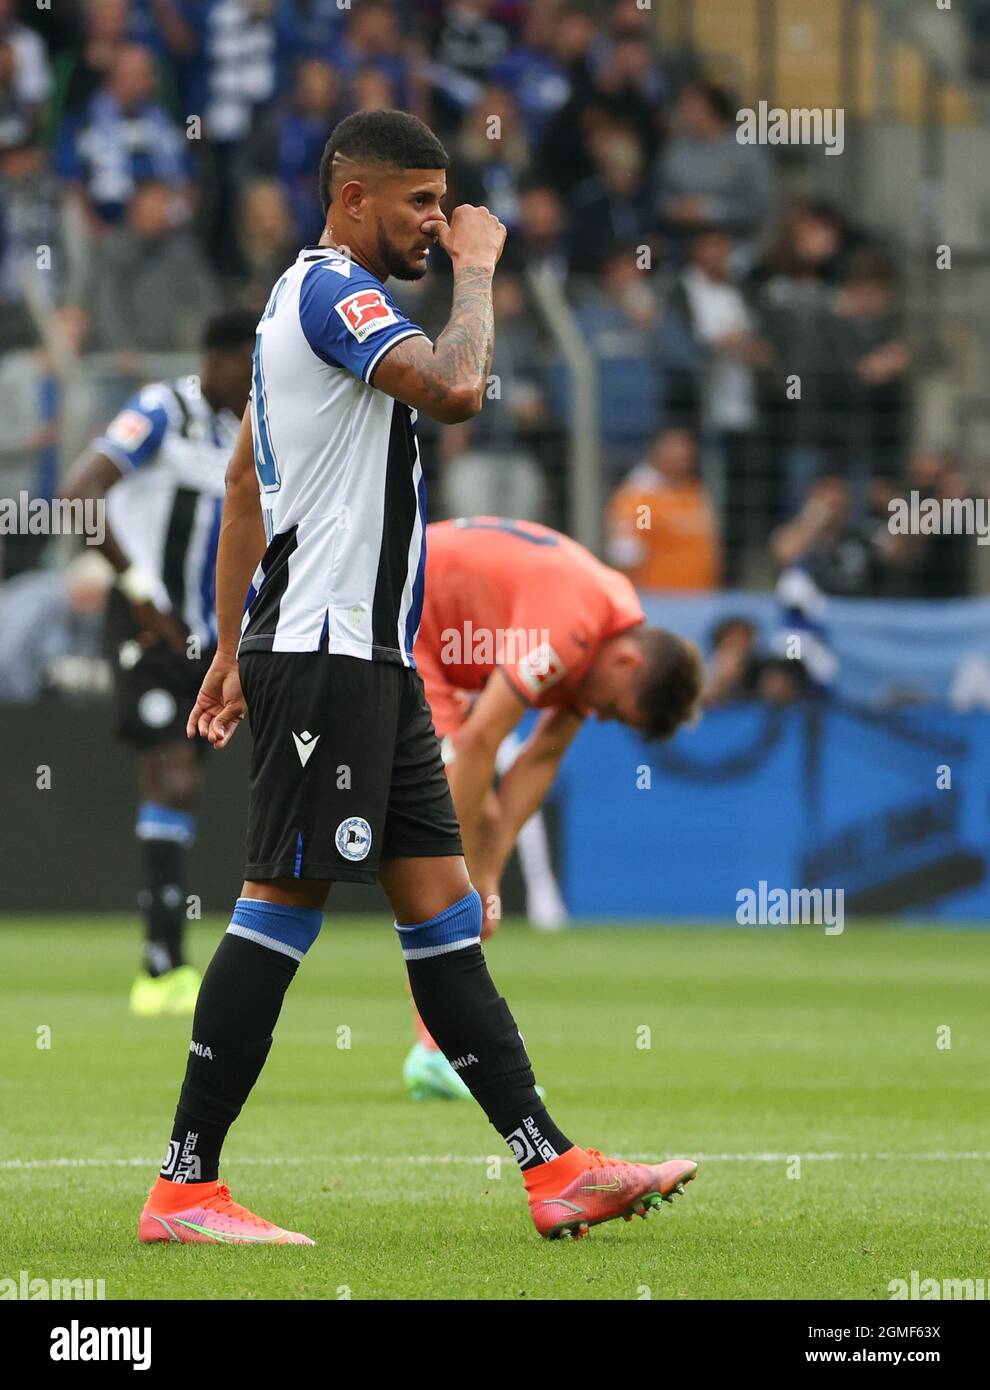 Bielefeld, Germany. 18th Sep, 2021. Football: Bundesliga, Arminia Bielefeld  - TSG 1899 Hoffenheim, Matchday 5 at Schüco Arena. Bielefeld's new signing  Andres Andrade touches his nose. Credit: Friso Gentsch/dpa - IMPORTANT NOTE: